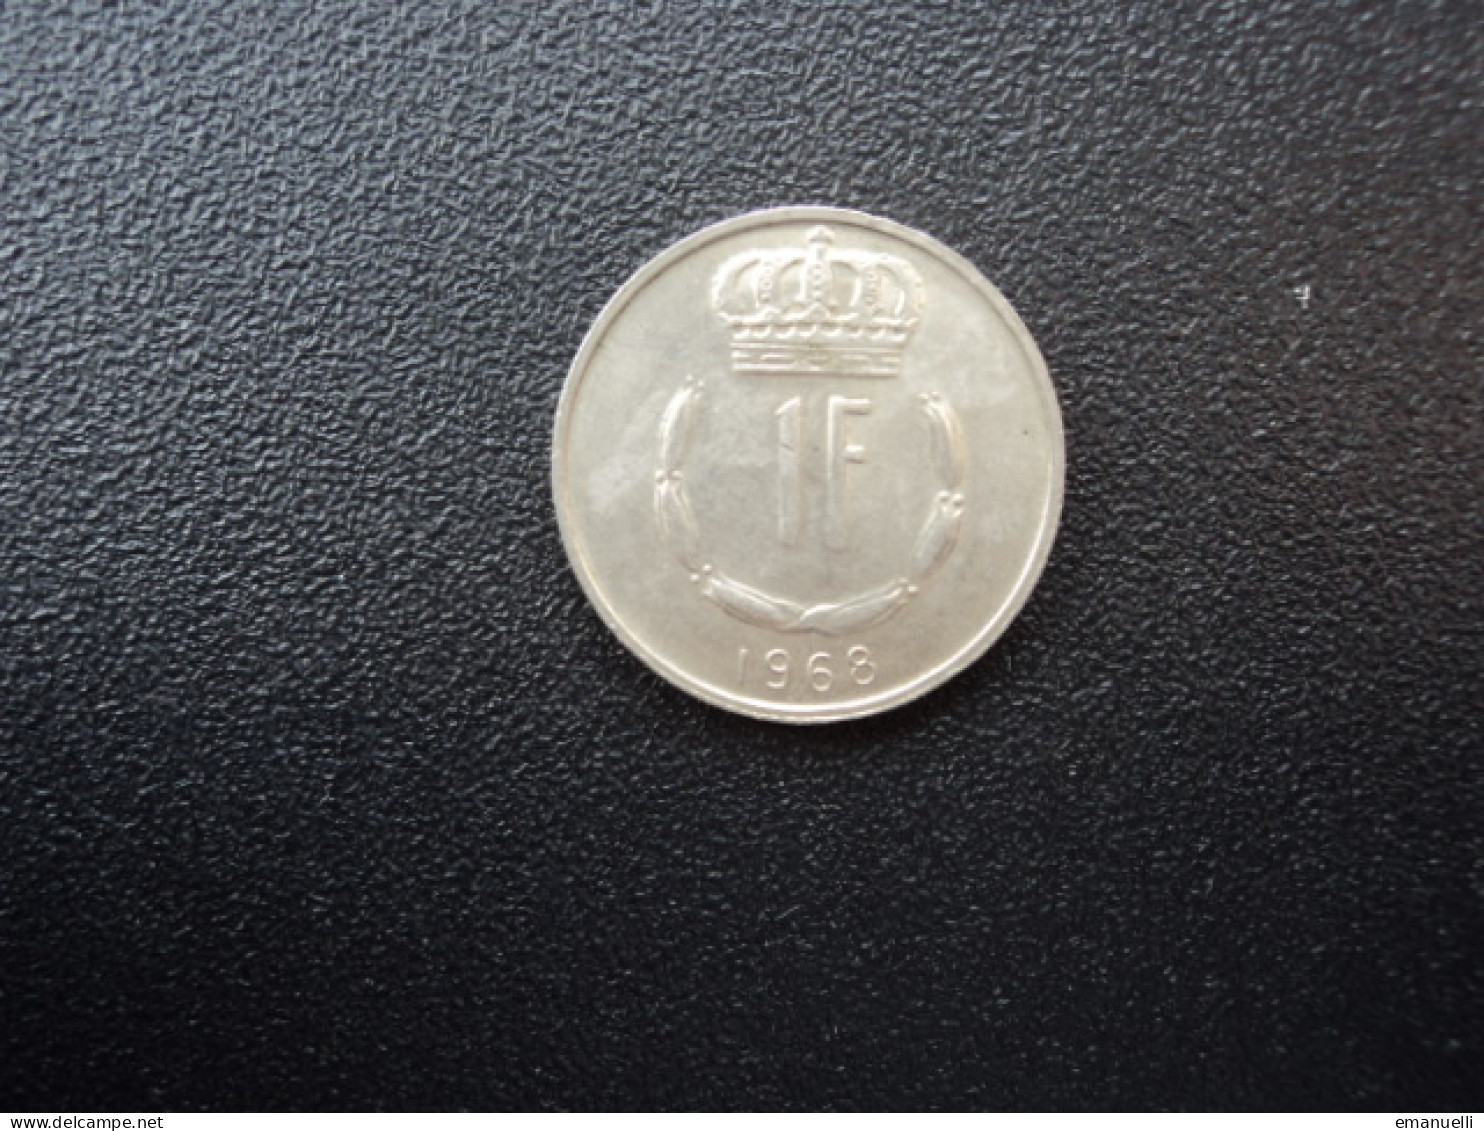 LUXEMBOURG : 1 FRANC  1968   KM 55     SUP * - Luxembourg